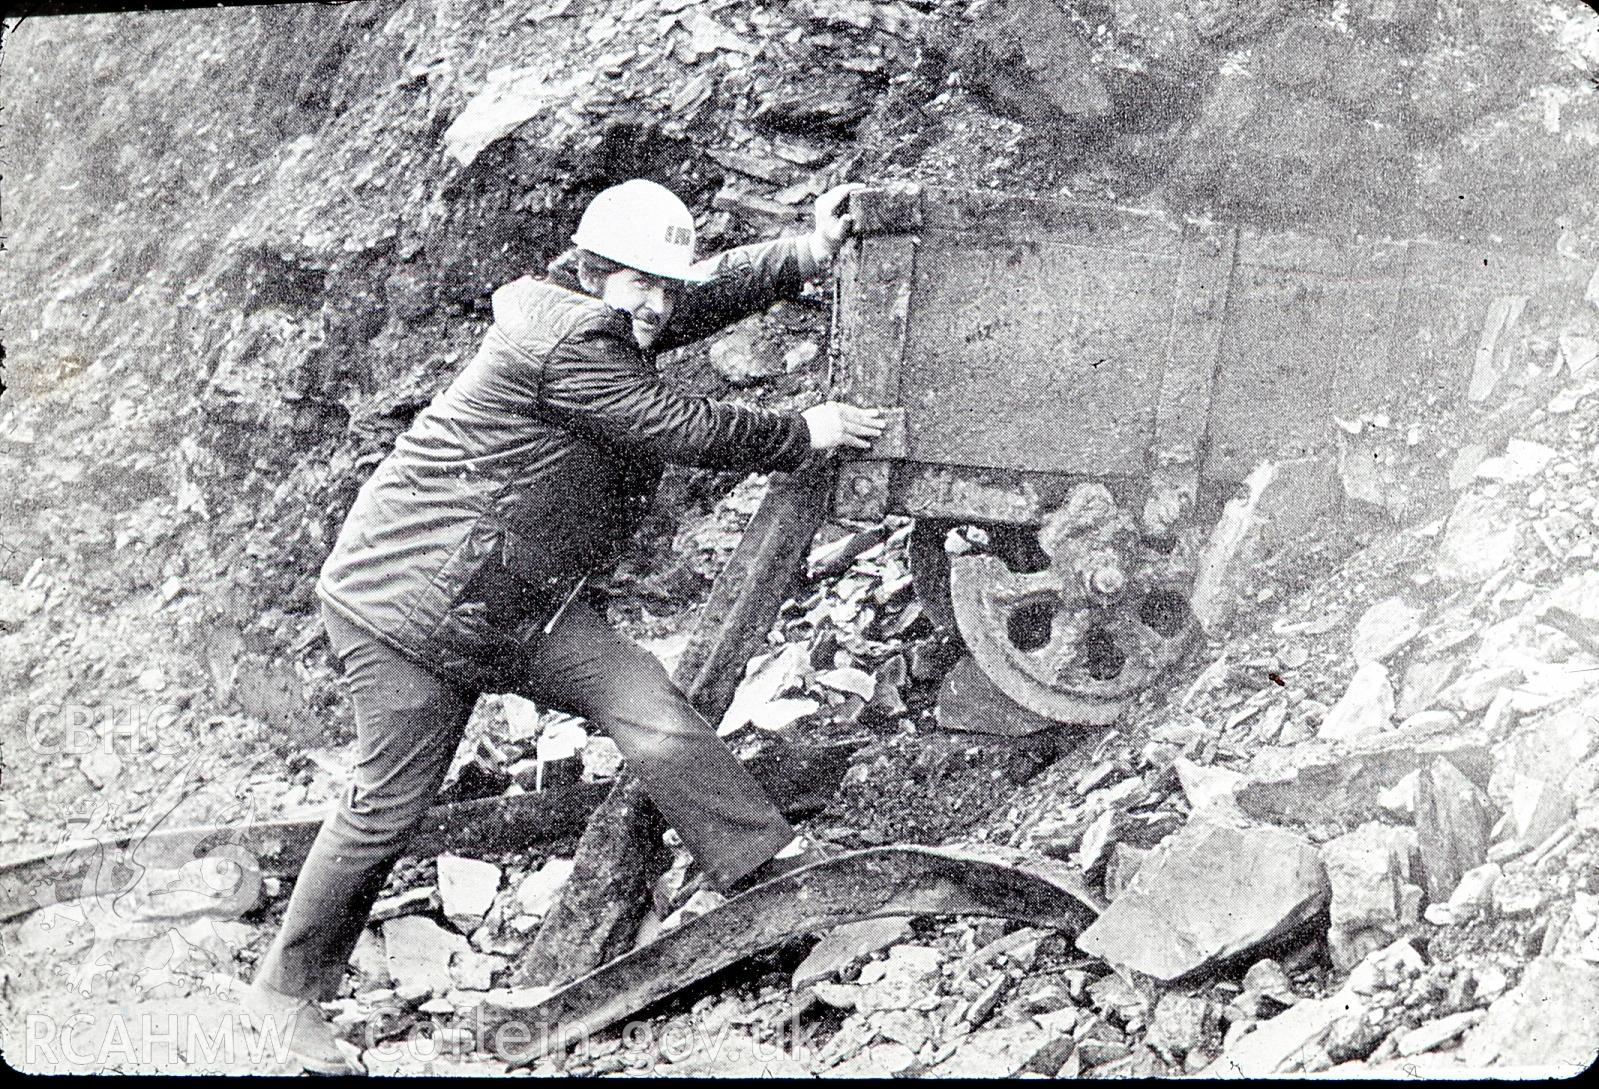 Digital photograph showing man with old dram at Blaenavon colliery opencast, taken c1985